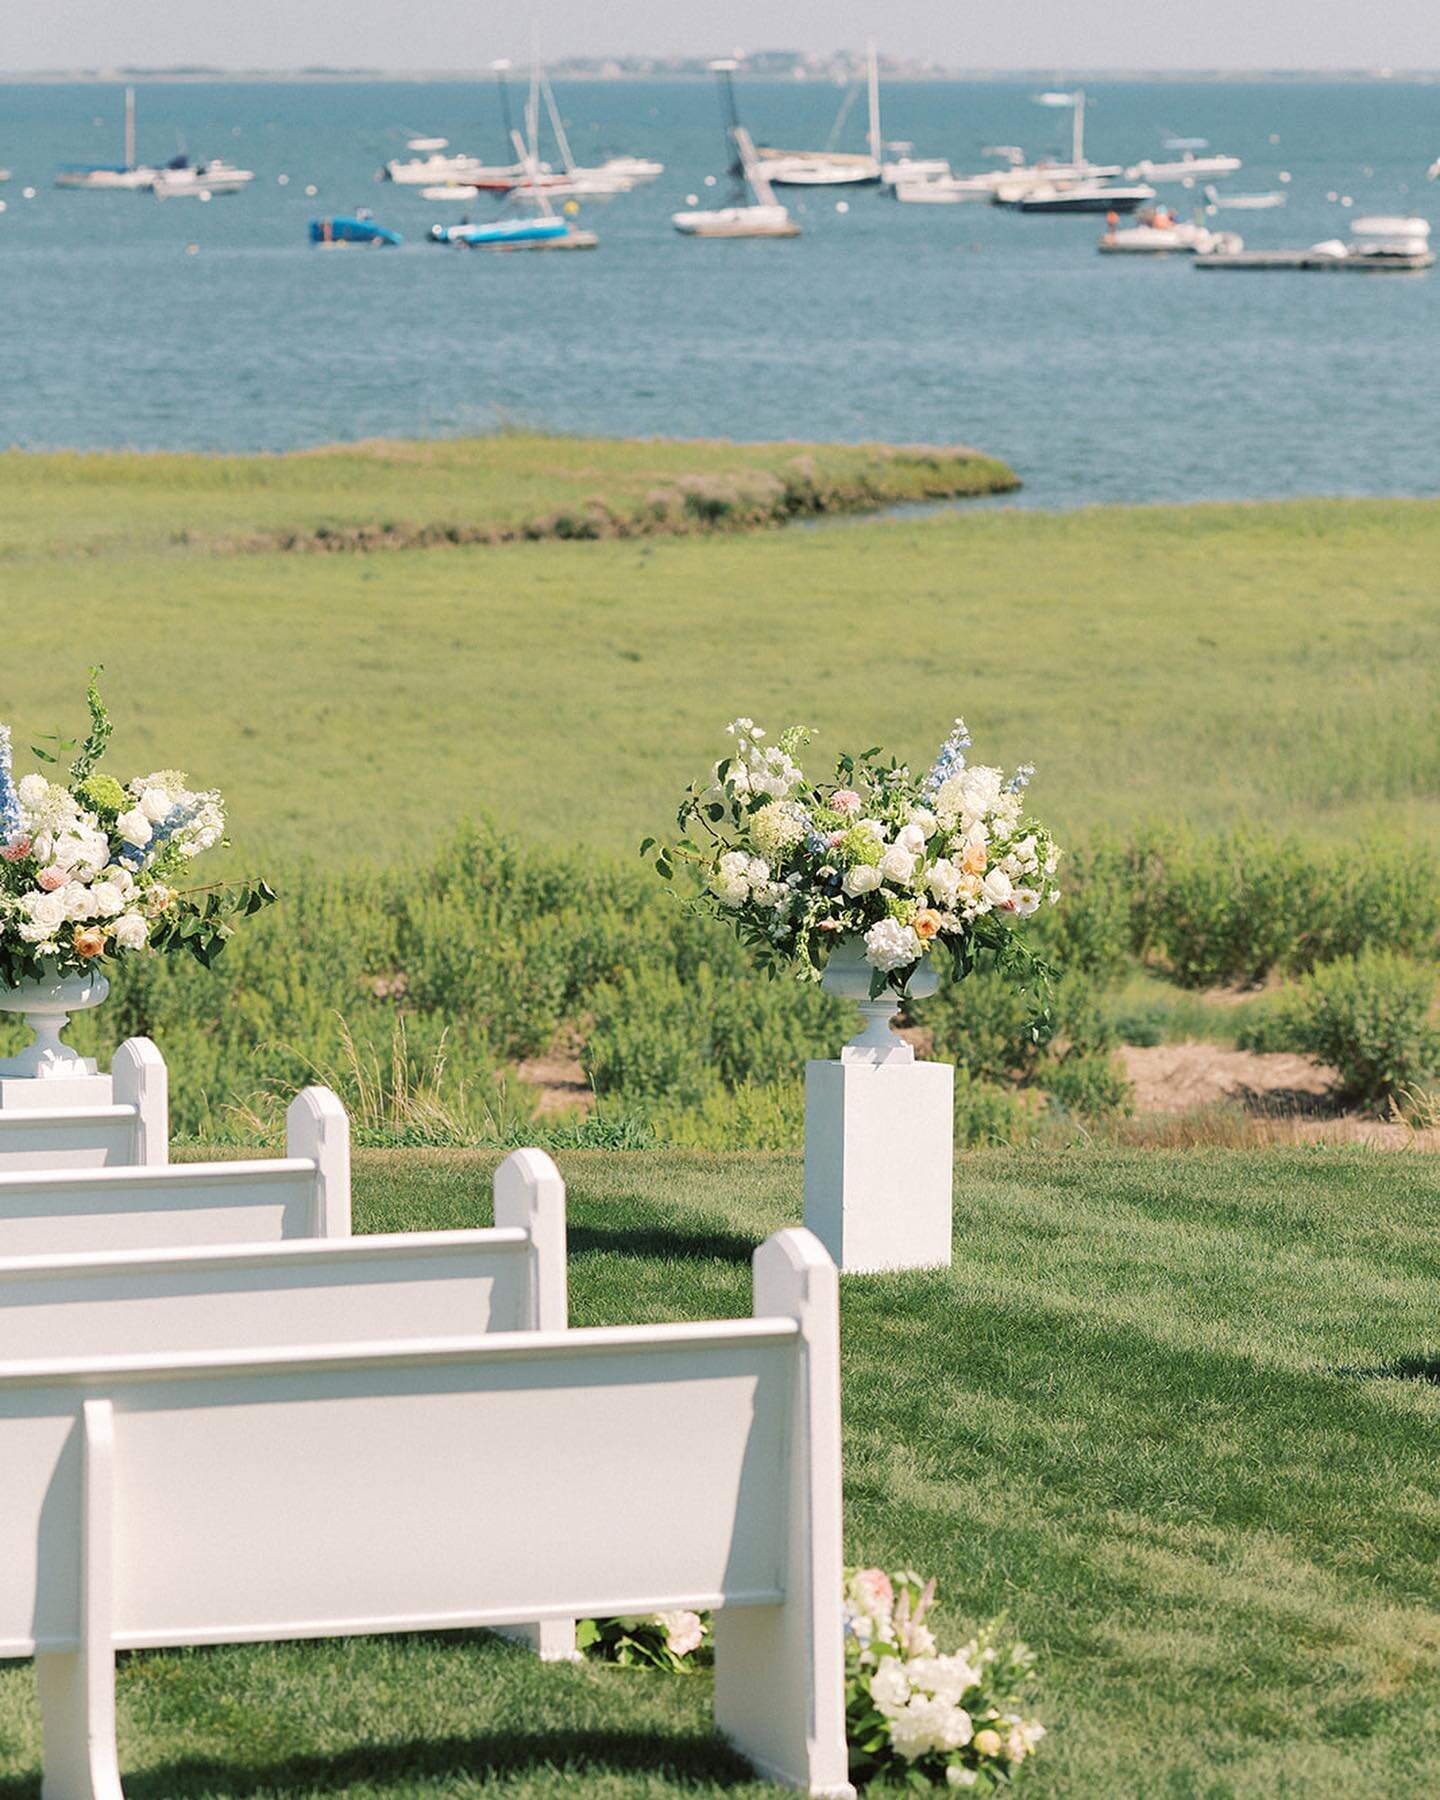 Oh, how I love a seaside ceremony. ✨

Wedding Planning + Design: @jessicahennesseyweddings | Photography @katherinebrackman | Floral Design @beachplumfloral | Catering (Wedding) @williamferencecatering + Raw Bar @islandcreekoysters | Desserts @french